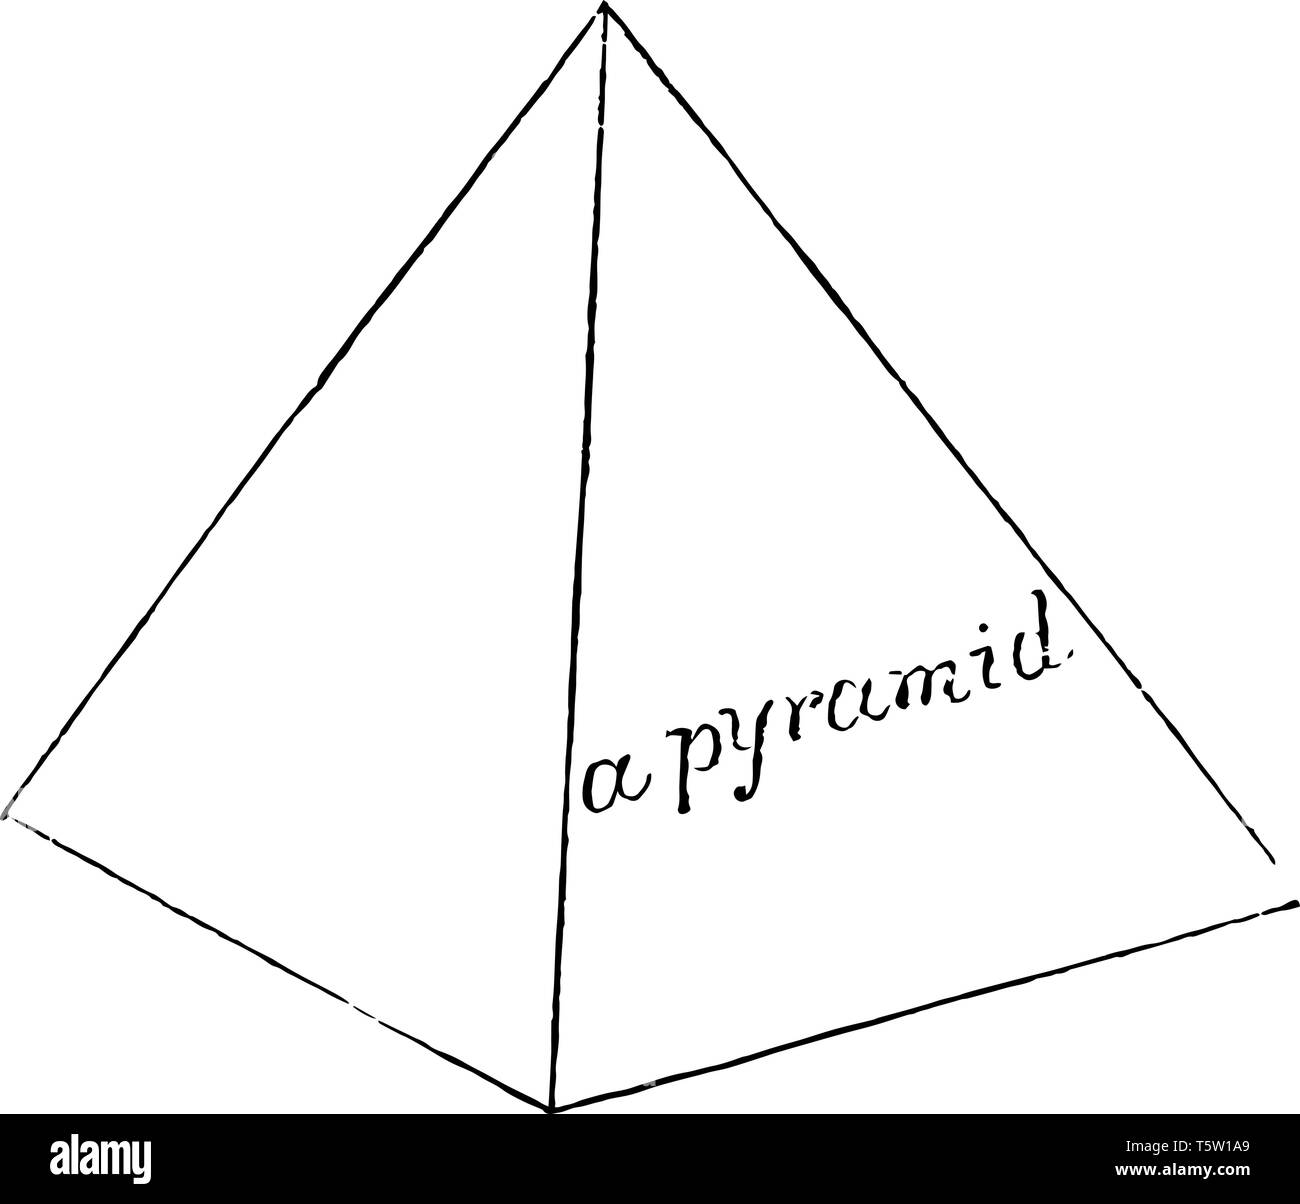 The image shows a pyramid. A pyramid is a polyhedron formed by the  connection of a